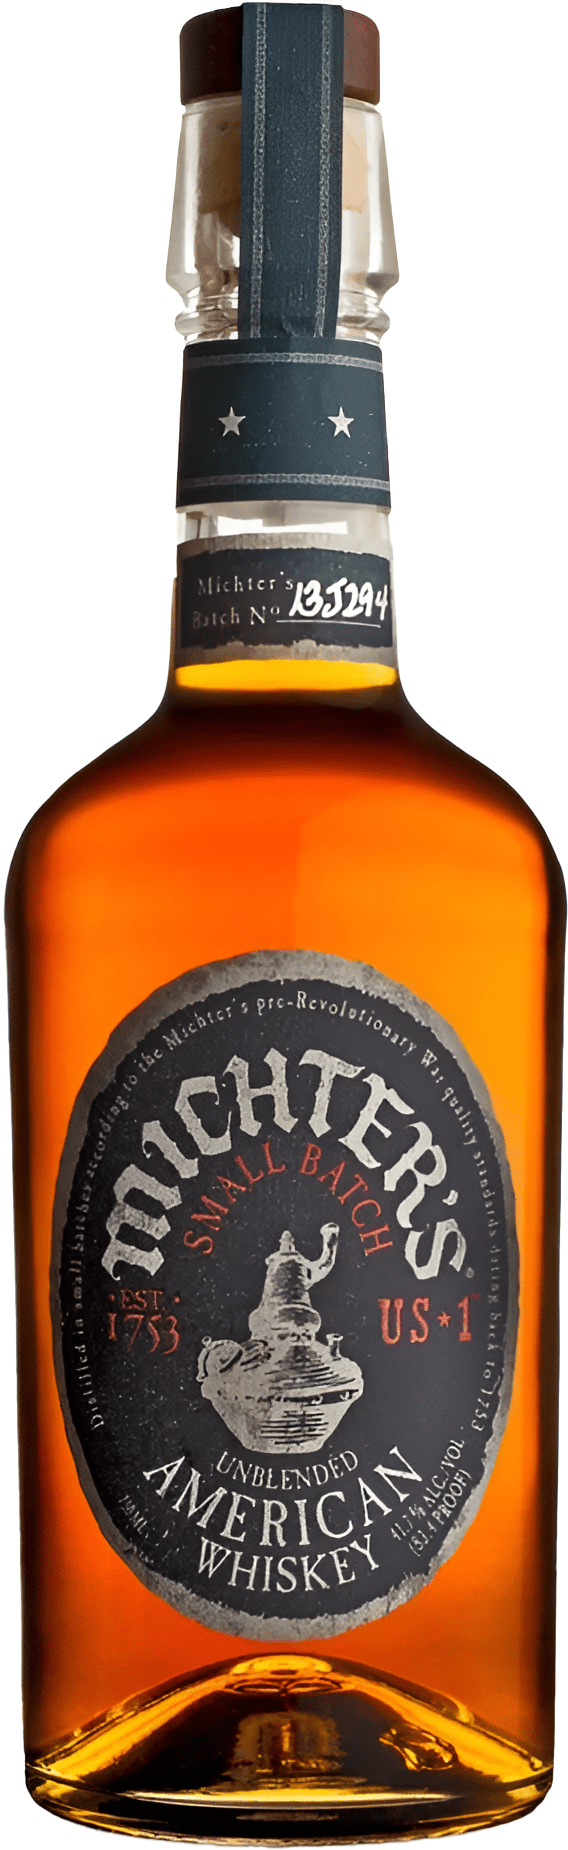 Michter's US*1 American Whiskey 41,7% 0,7l